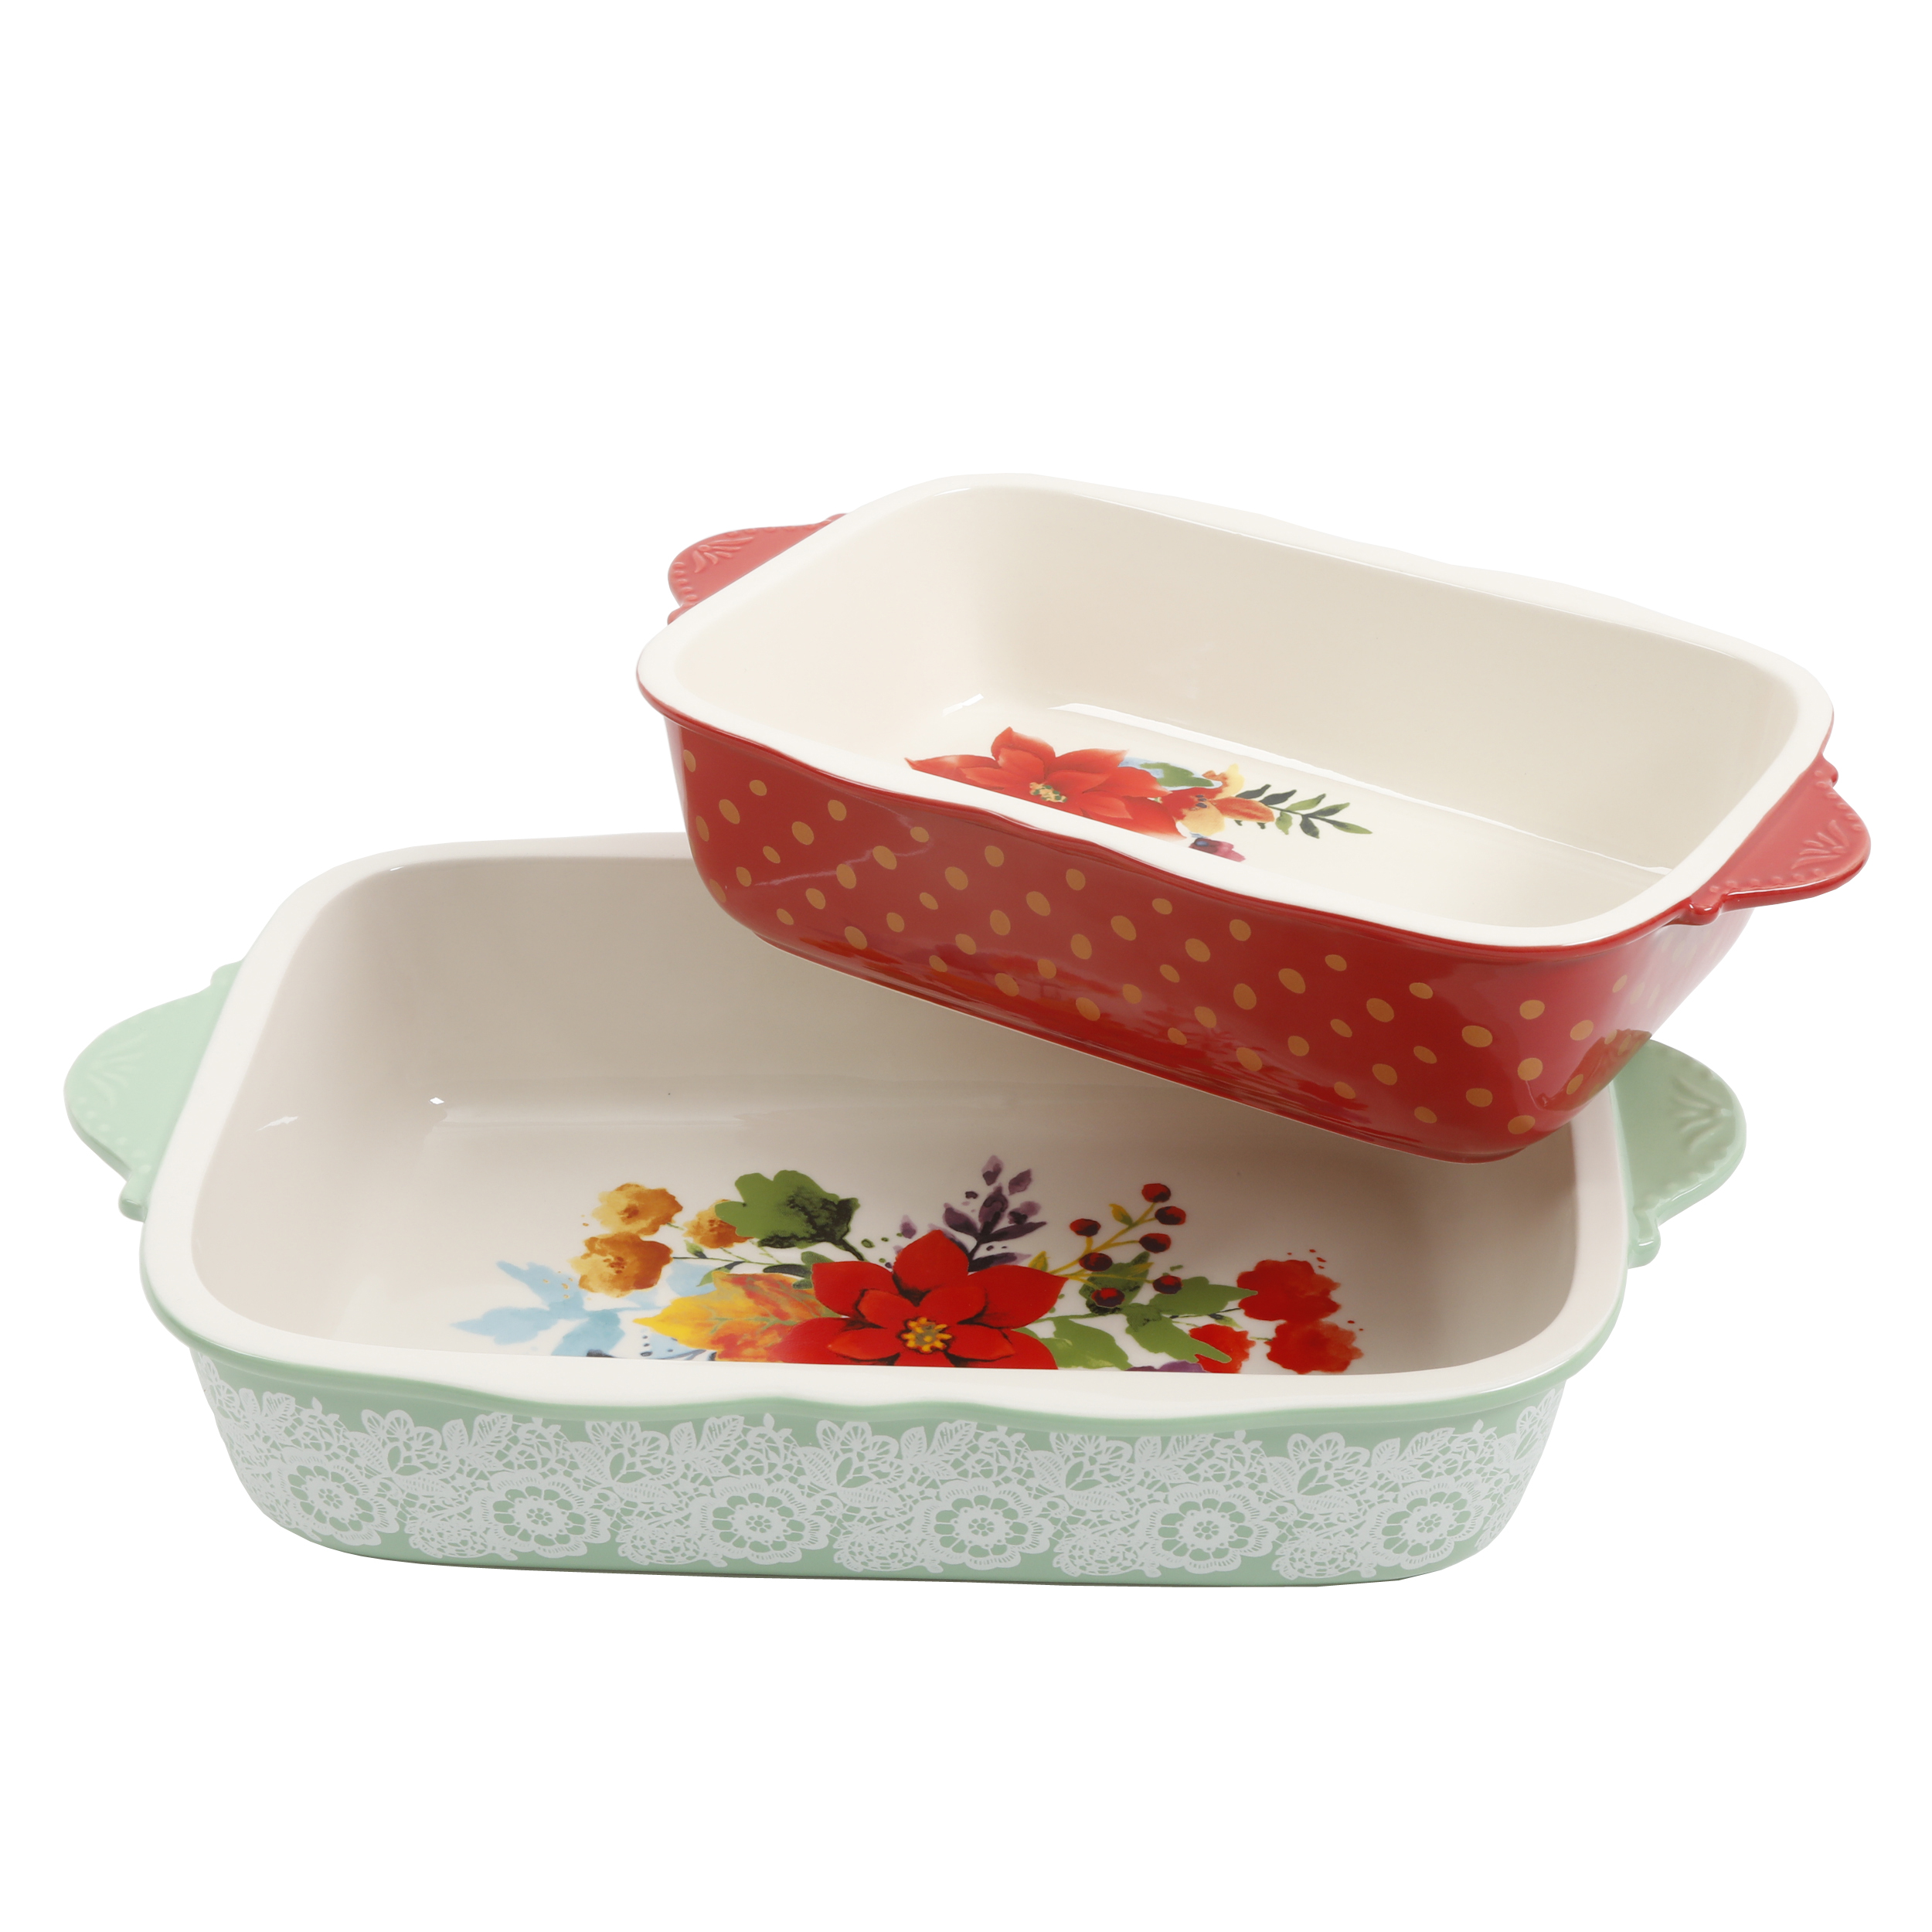 The Pioneer Woman Frost 2-Piece Bakeware Set - image 3 of 7